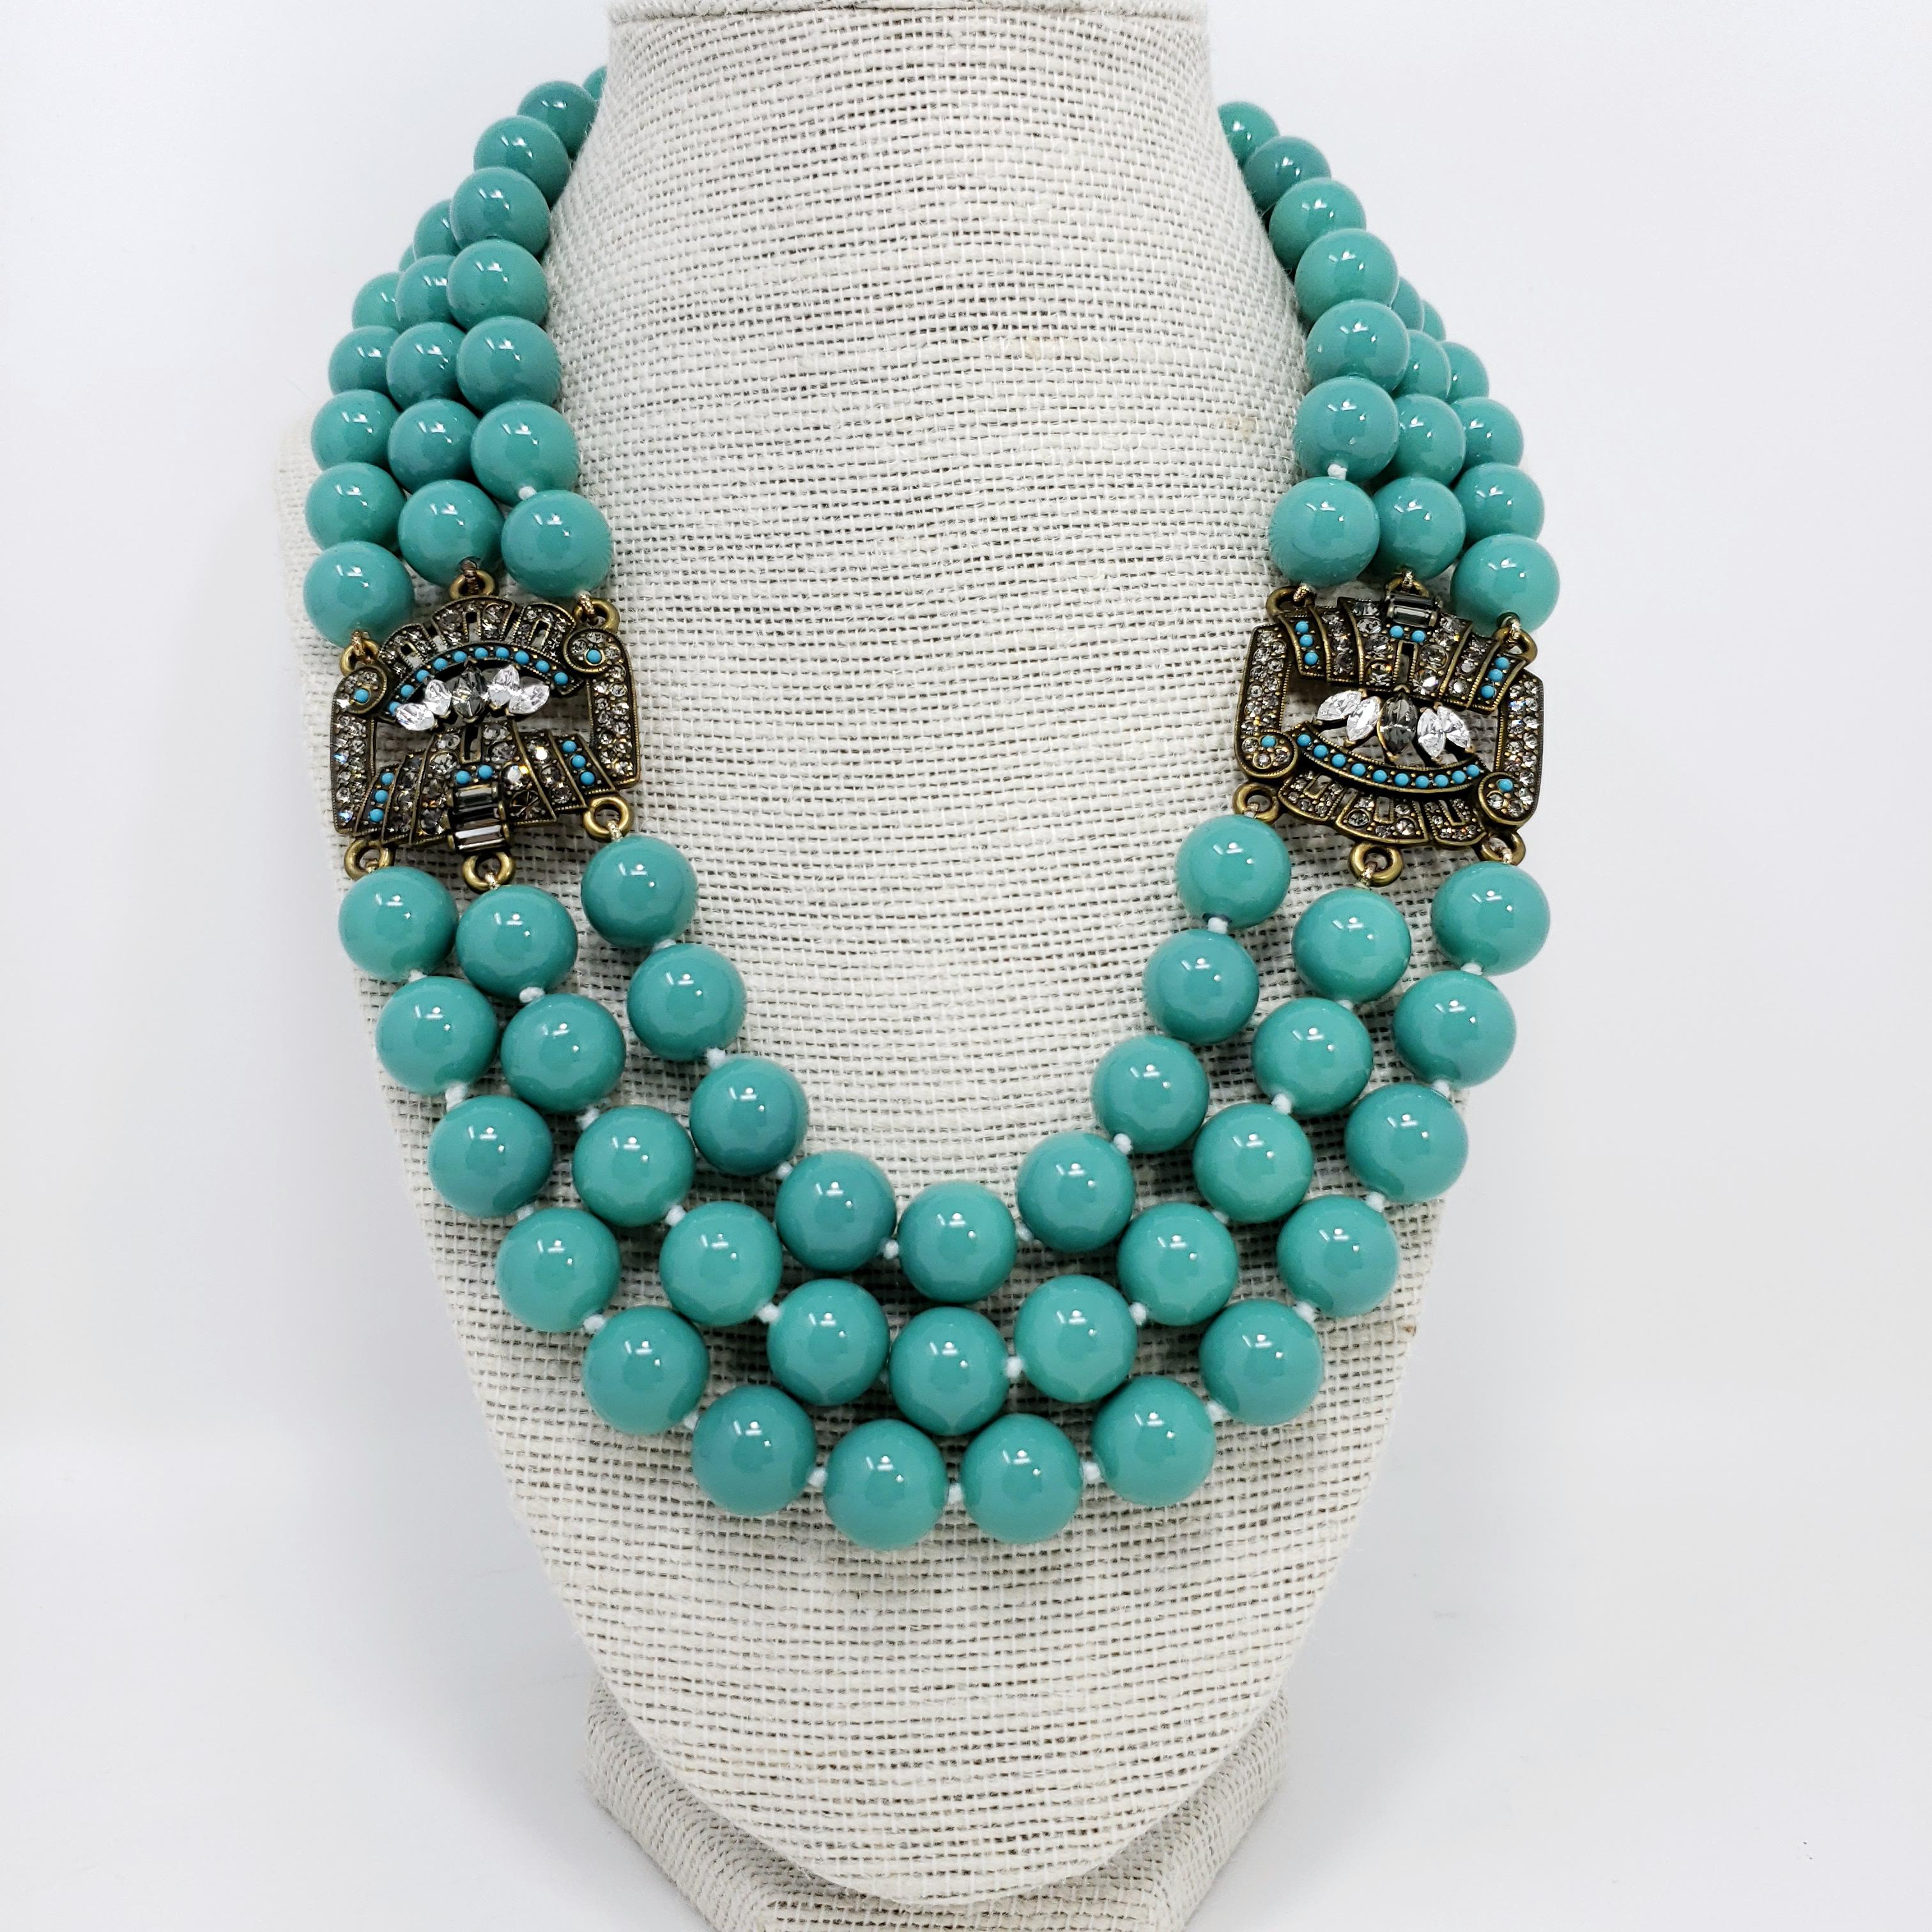 Bold beads by Heidi Daus! Three strands of 12.5mm turquoise beads are connected with antique brass-tone, crystal-encrusted, findings for a sophisticated, yet bold, look.

Length: 47.5 cm

Hallmarks: Heidi Daus, China